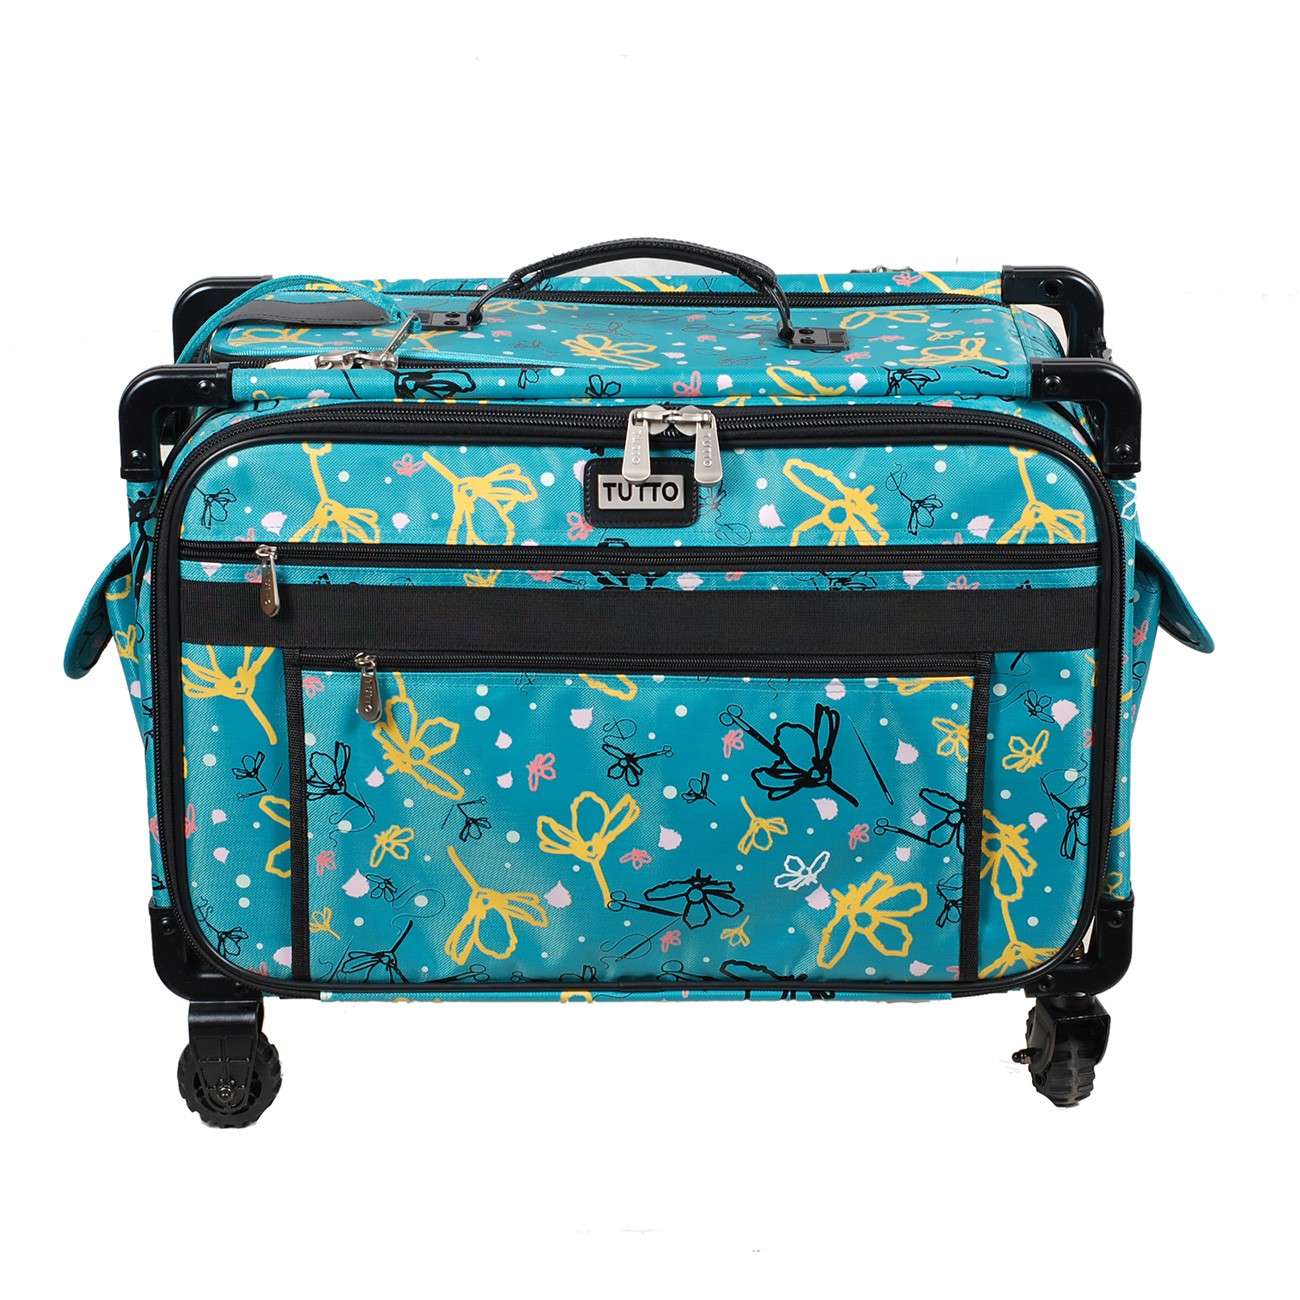 Tutto Sewing Machine Case On Wheels Large 21in Aqua with Daisy